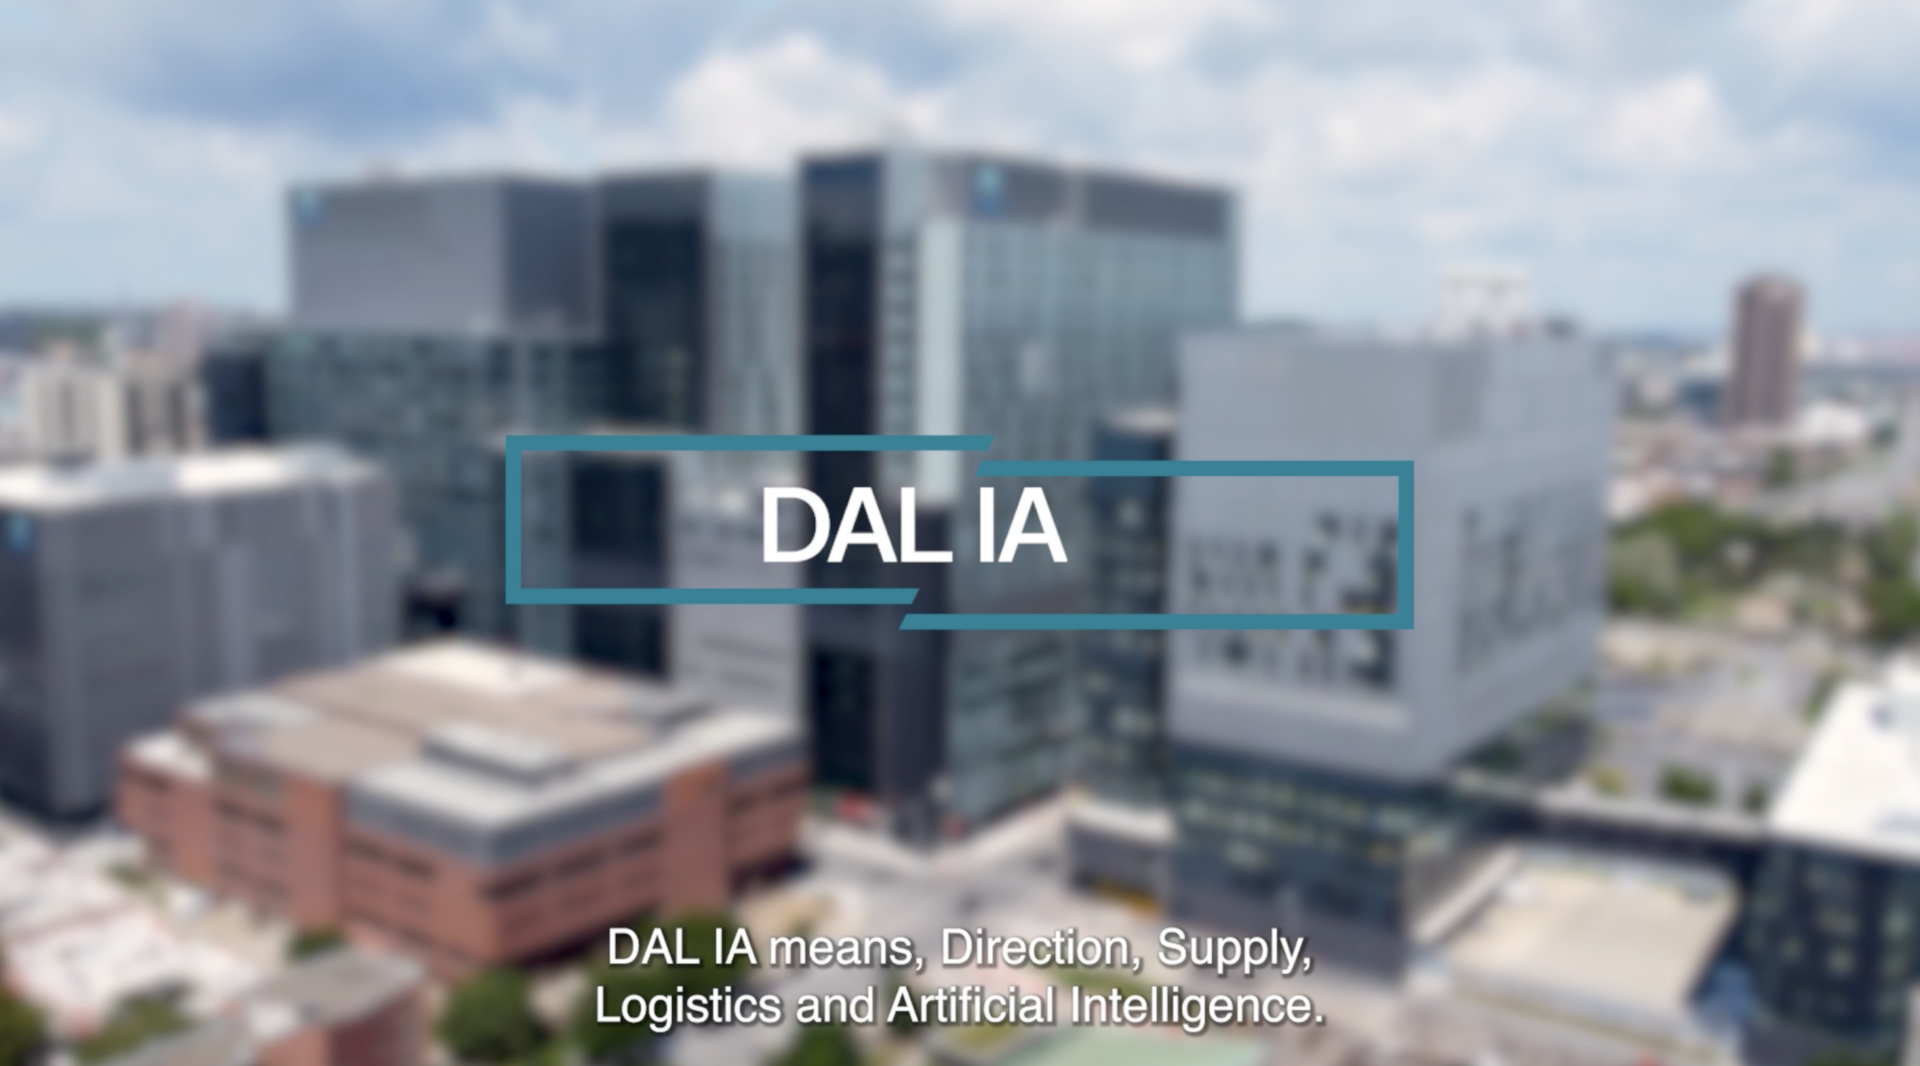 DAL.IA: Using Artificial Intelligence to Manage the Supply Chain - Video